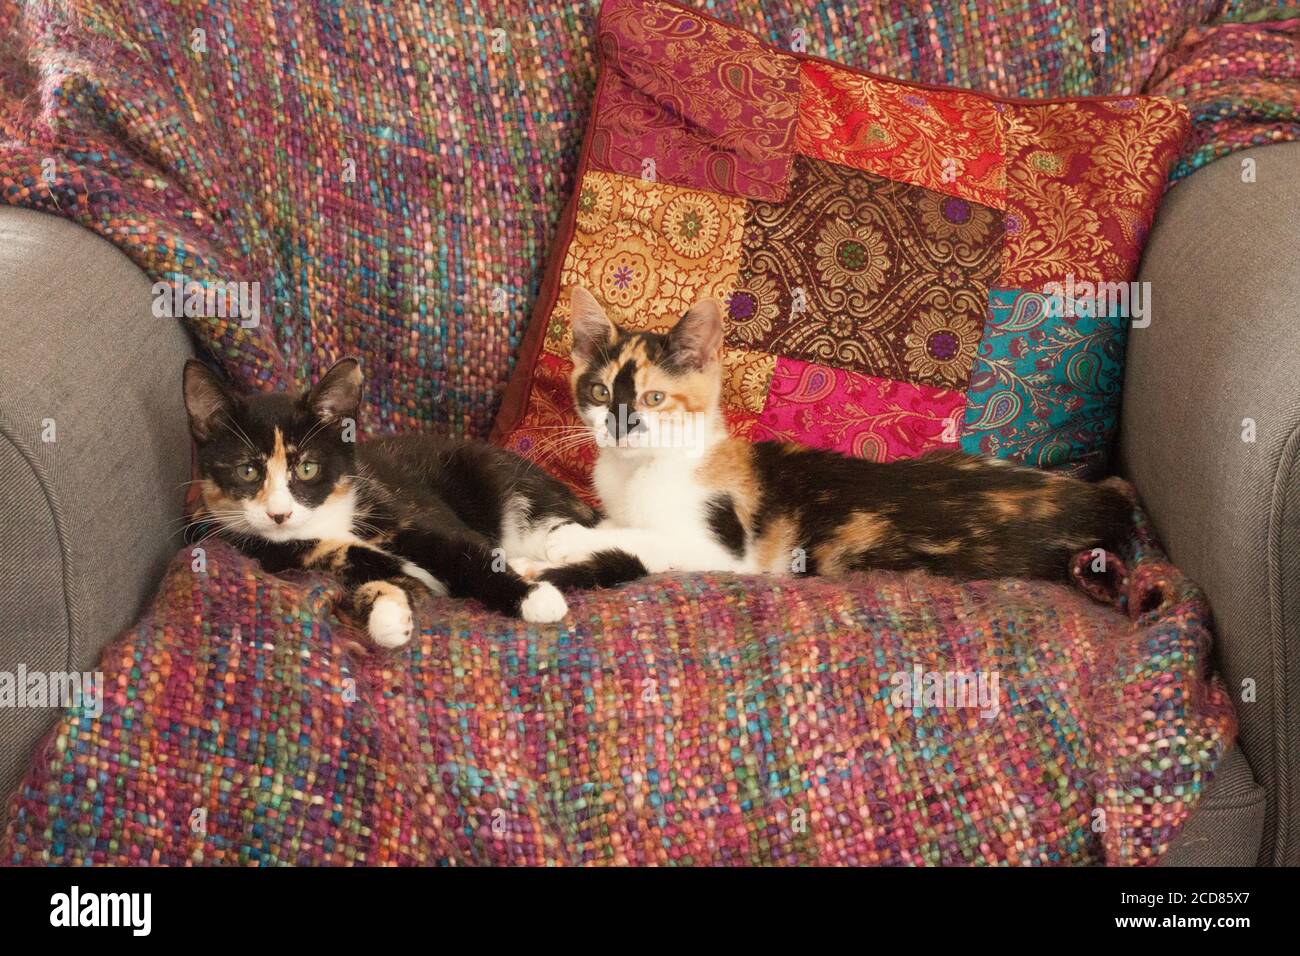 Calico Cats High Resolution Stock Photography and Images - Alamy